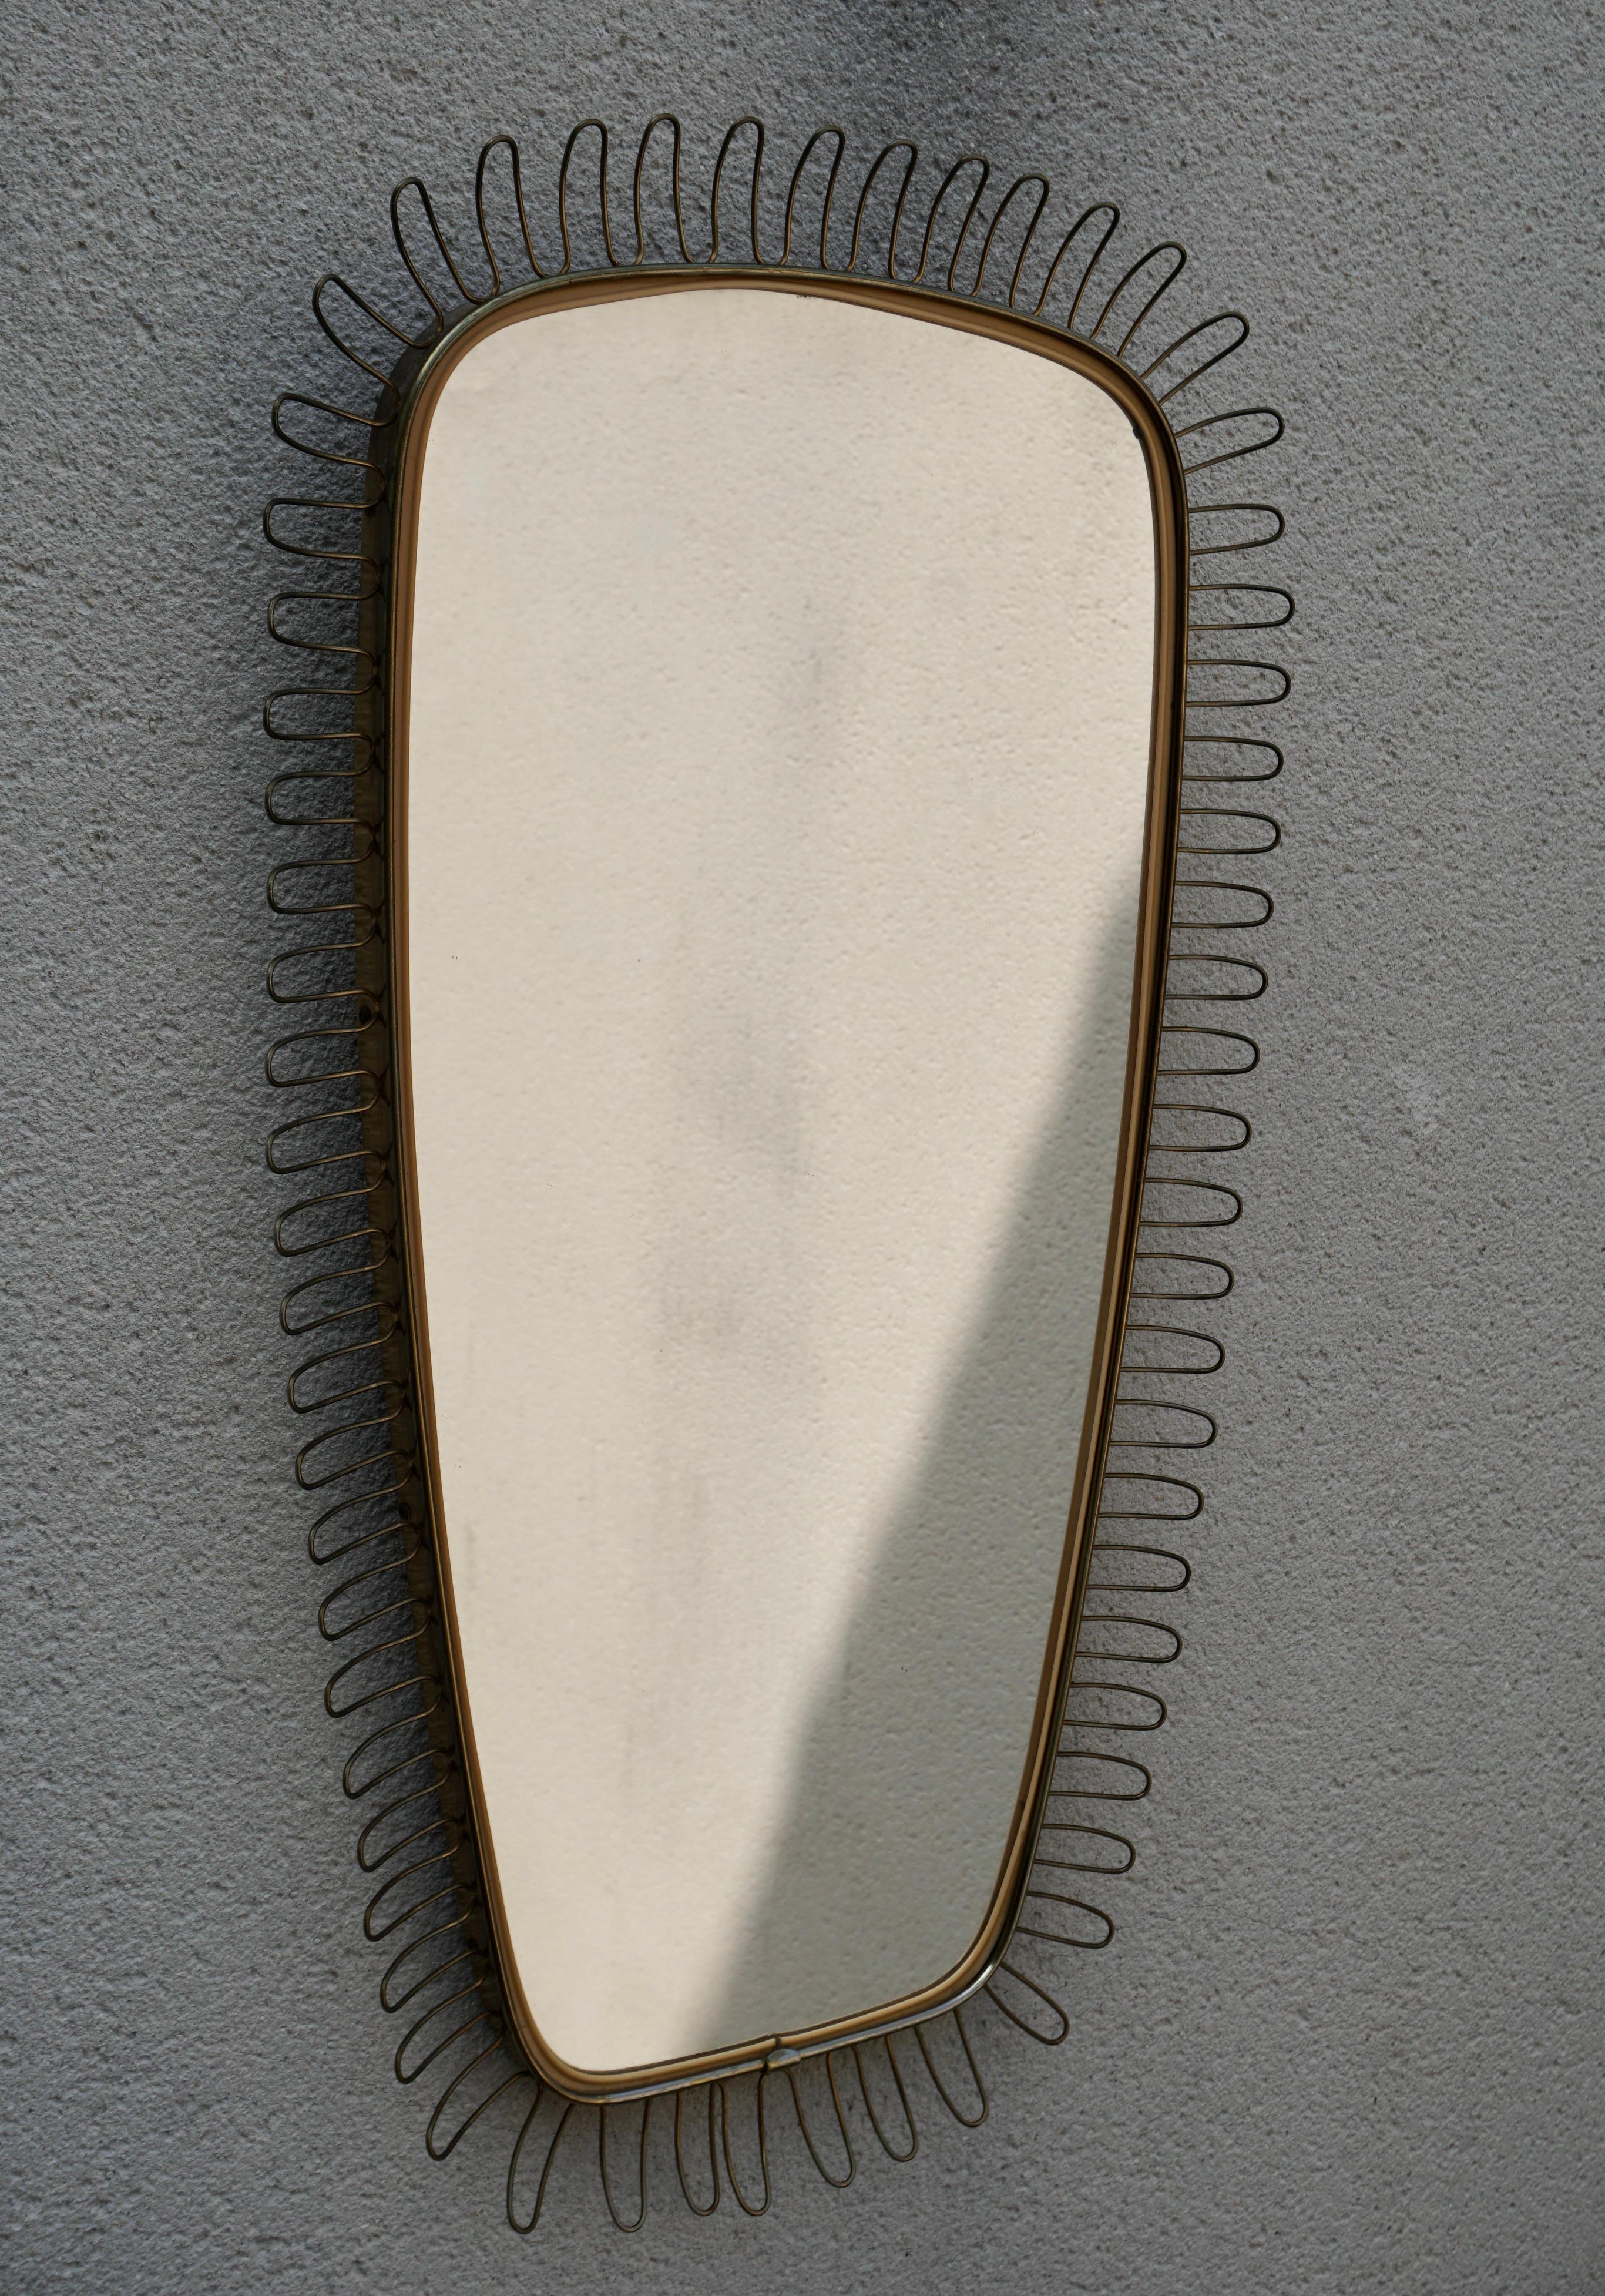 Beautiful original 1960s wall mirror, vintage design.

Elegant vintage wall mirror with a beautiful gold-colored frame. Very special, eye-catching home item from the 60s.